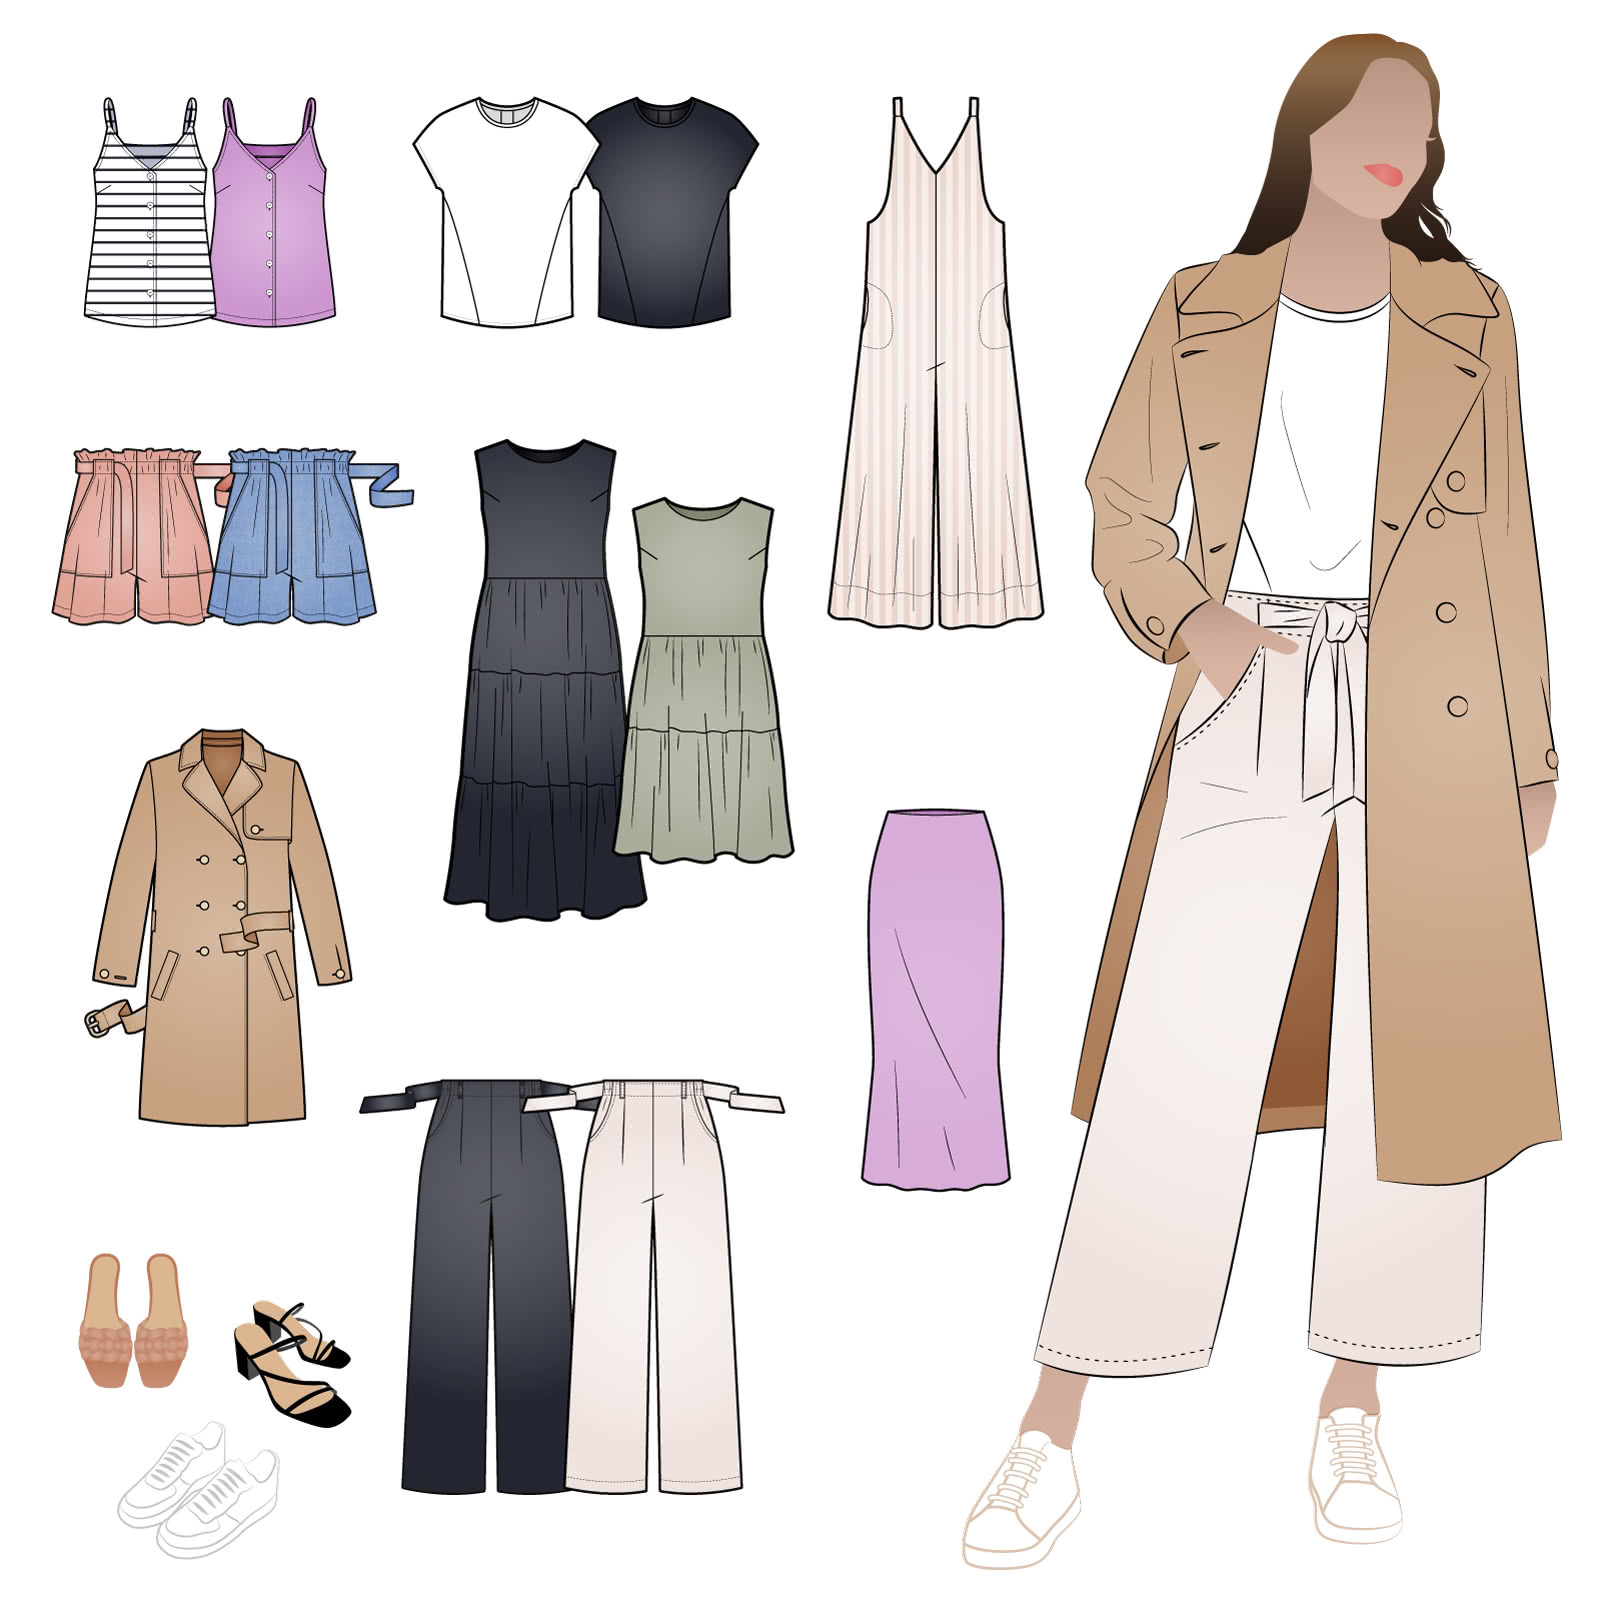 Spring Summer Capsule Wardrobe Bundle Sewing Pattern Bundle By Style Arc - The perfect Spring/Summer capsule wardrobe pattern collection.